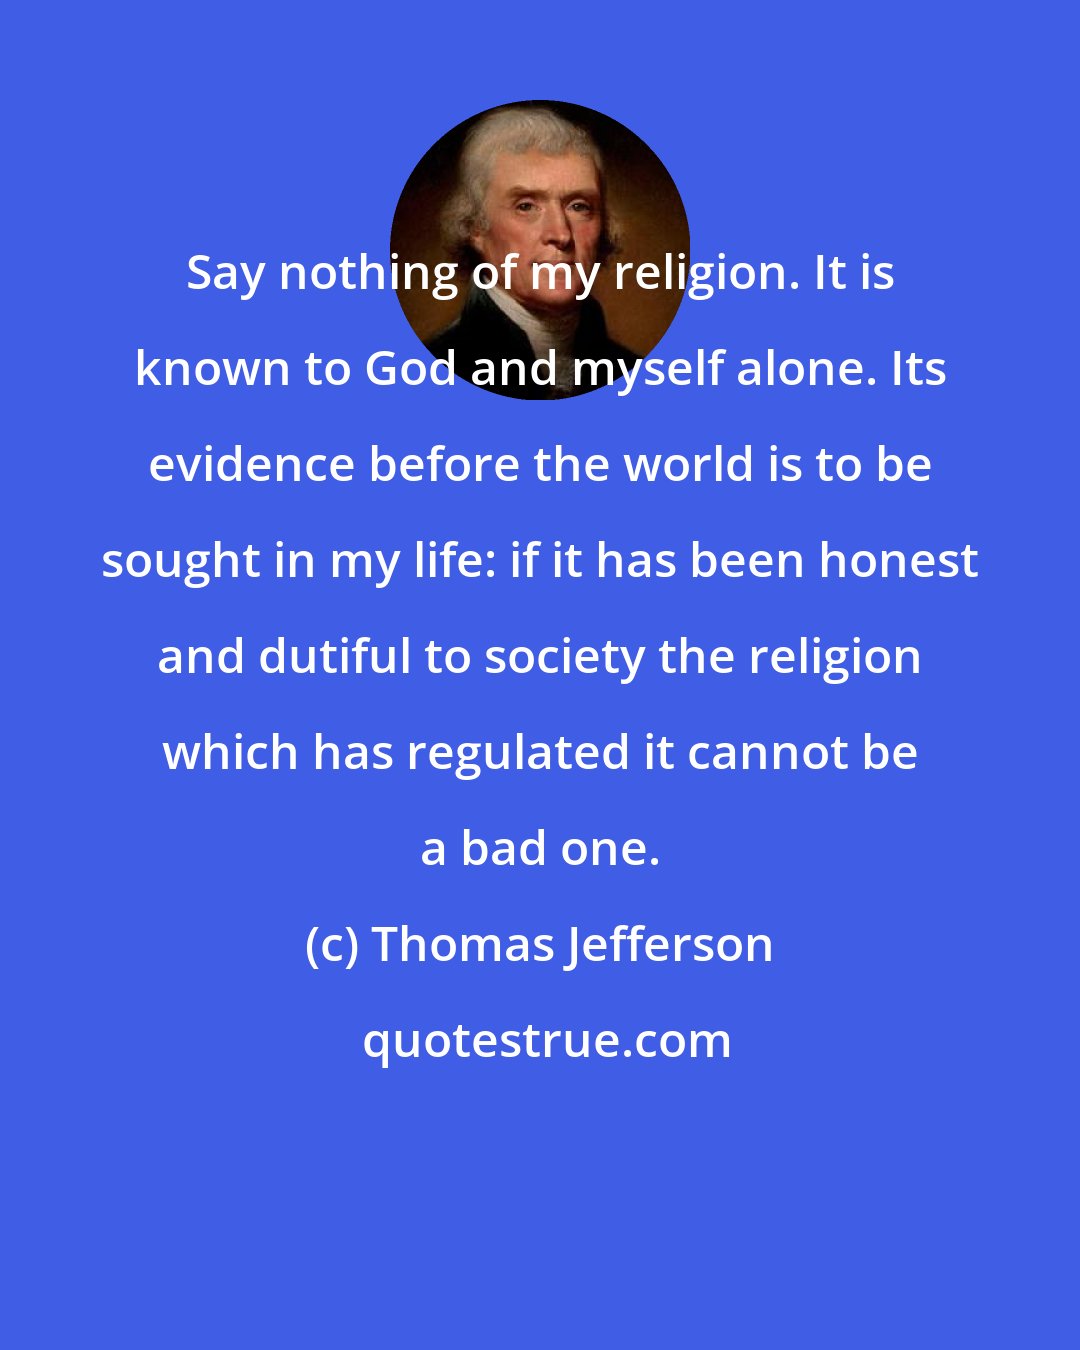 Thomas Jefferson: Say nothing of my religion. It is known to God and myself alone. Its evidence before the world is to be sought in my life: if it has been honest and dutiful to society the religion which has regulated it cannot be a bad one.